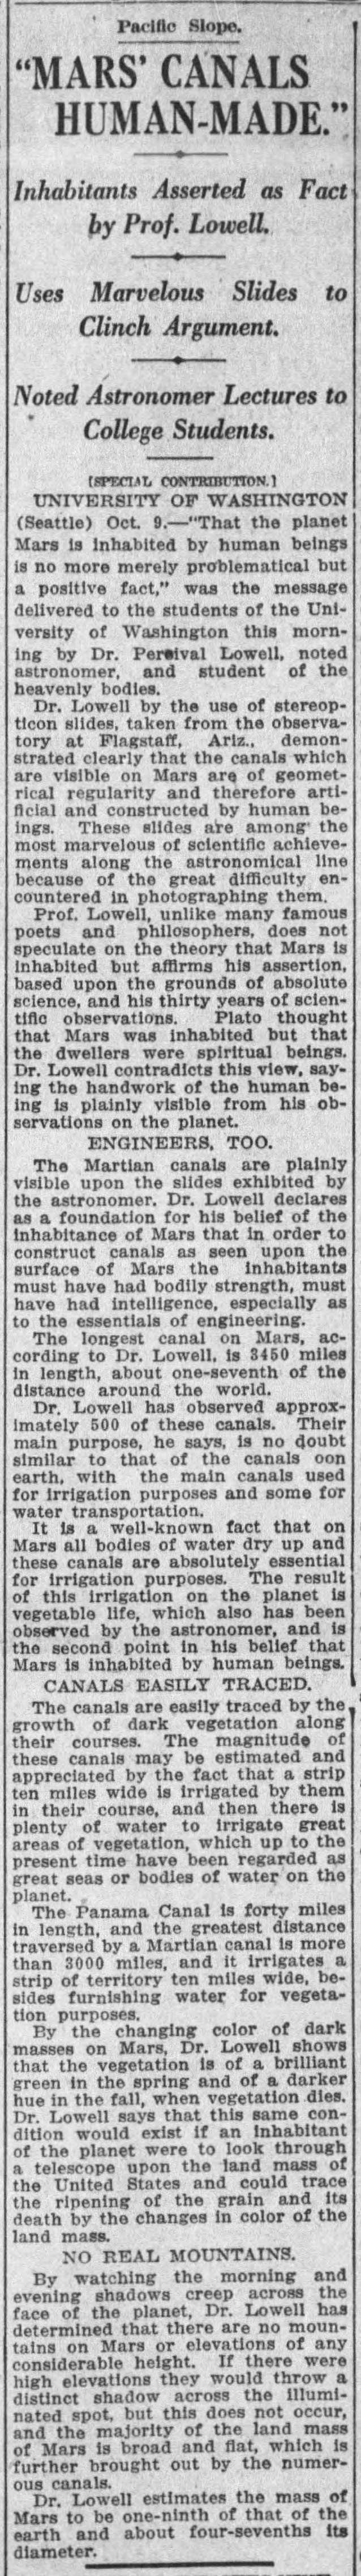 Lowell still defending idea of man-made Mars canals 1 month before death, 1916